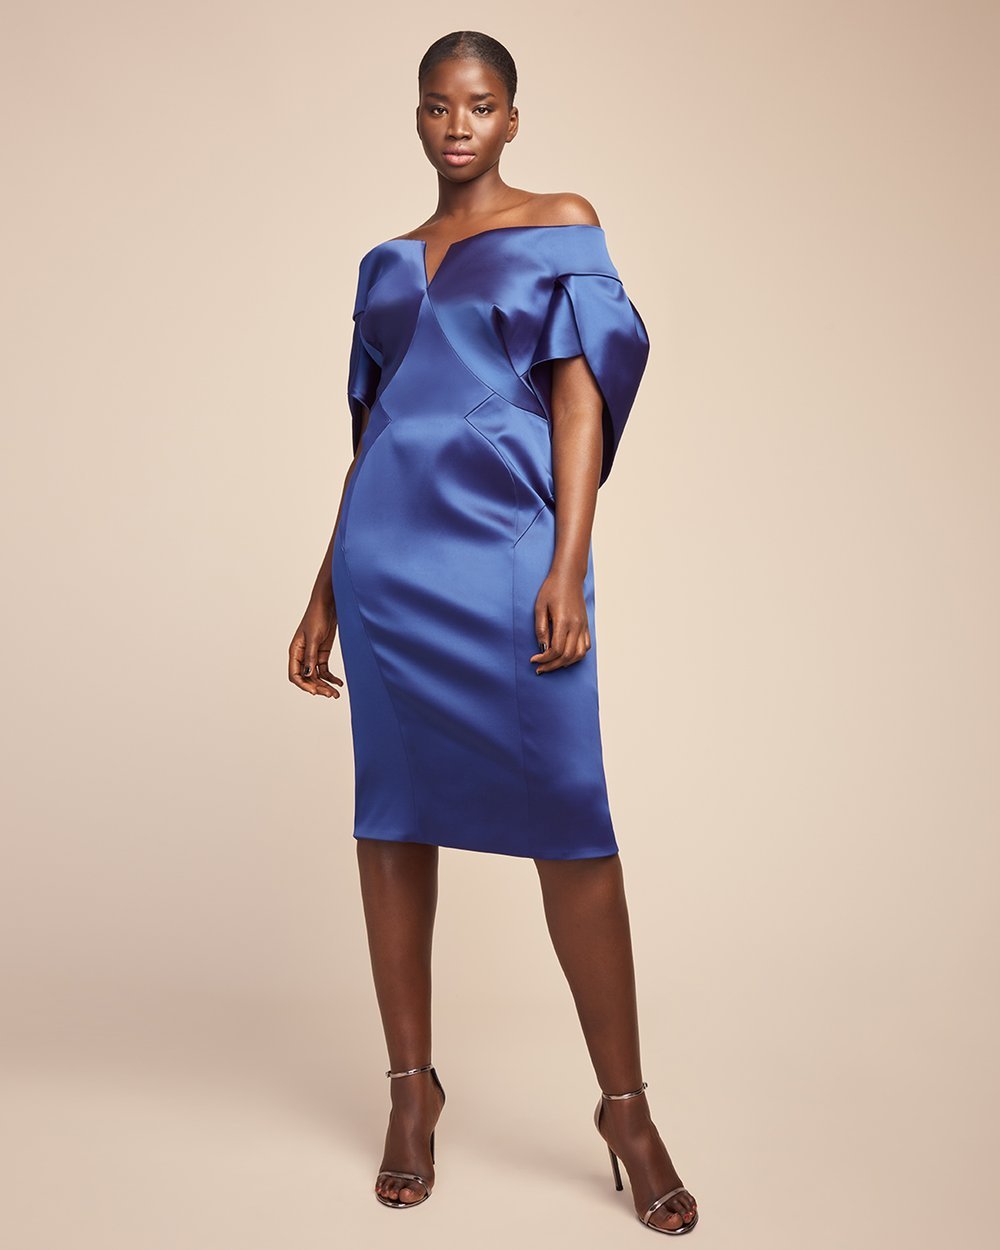 Luxury Plus SIze Fashion Finds at 11 Honore: ZAC POSEN Off-The-Shoulder Plus Size Dress